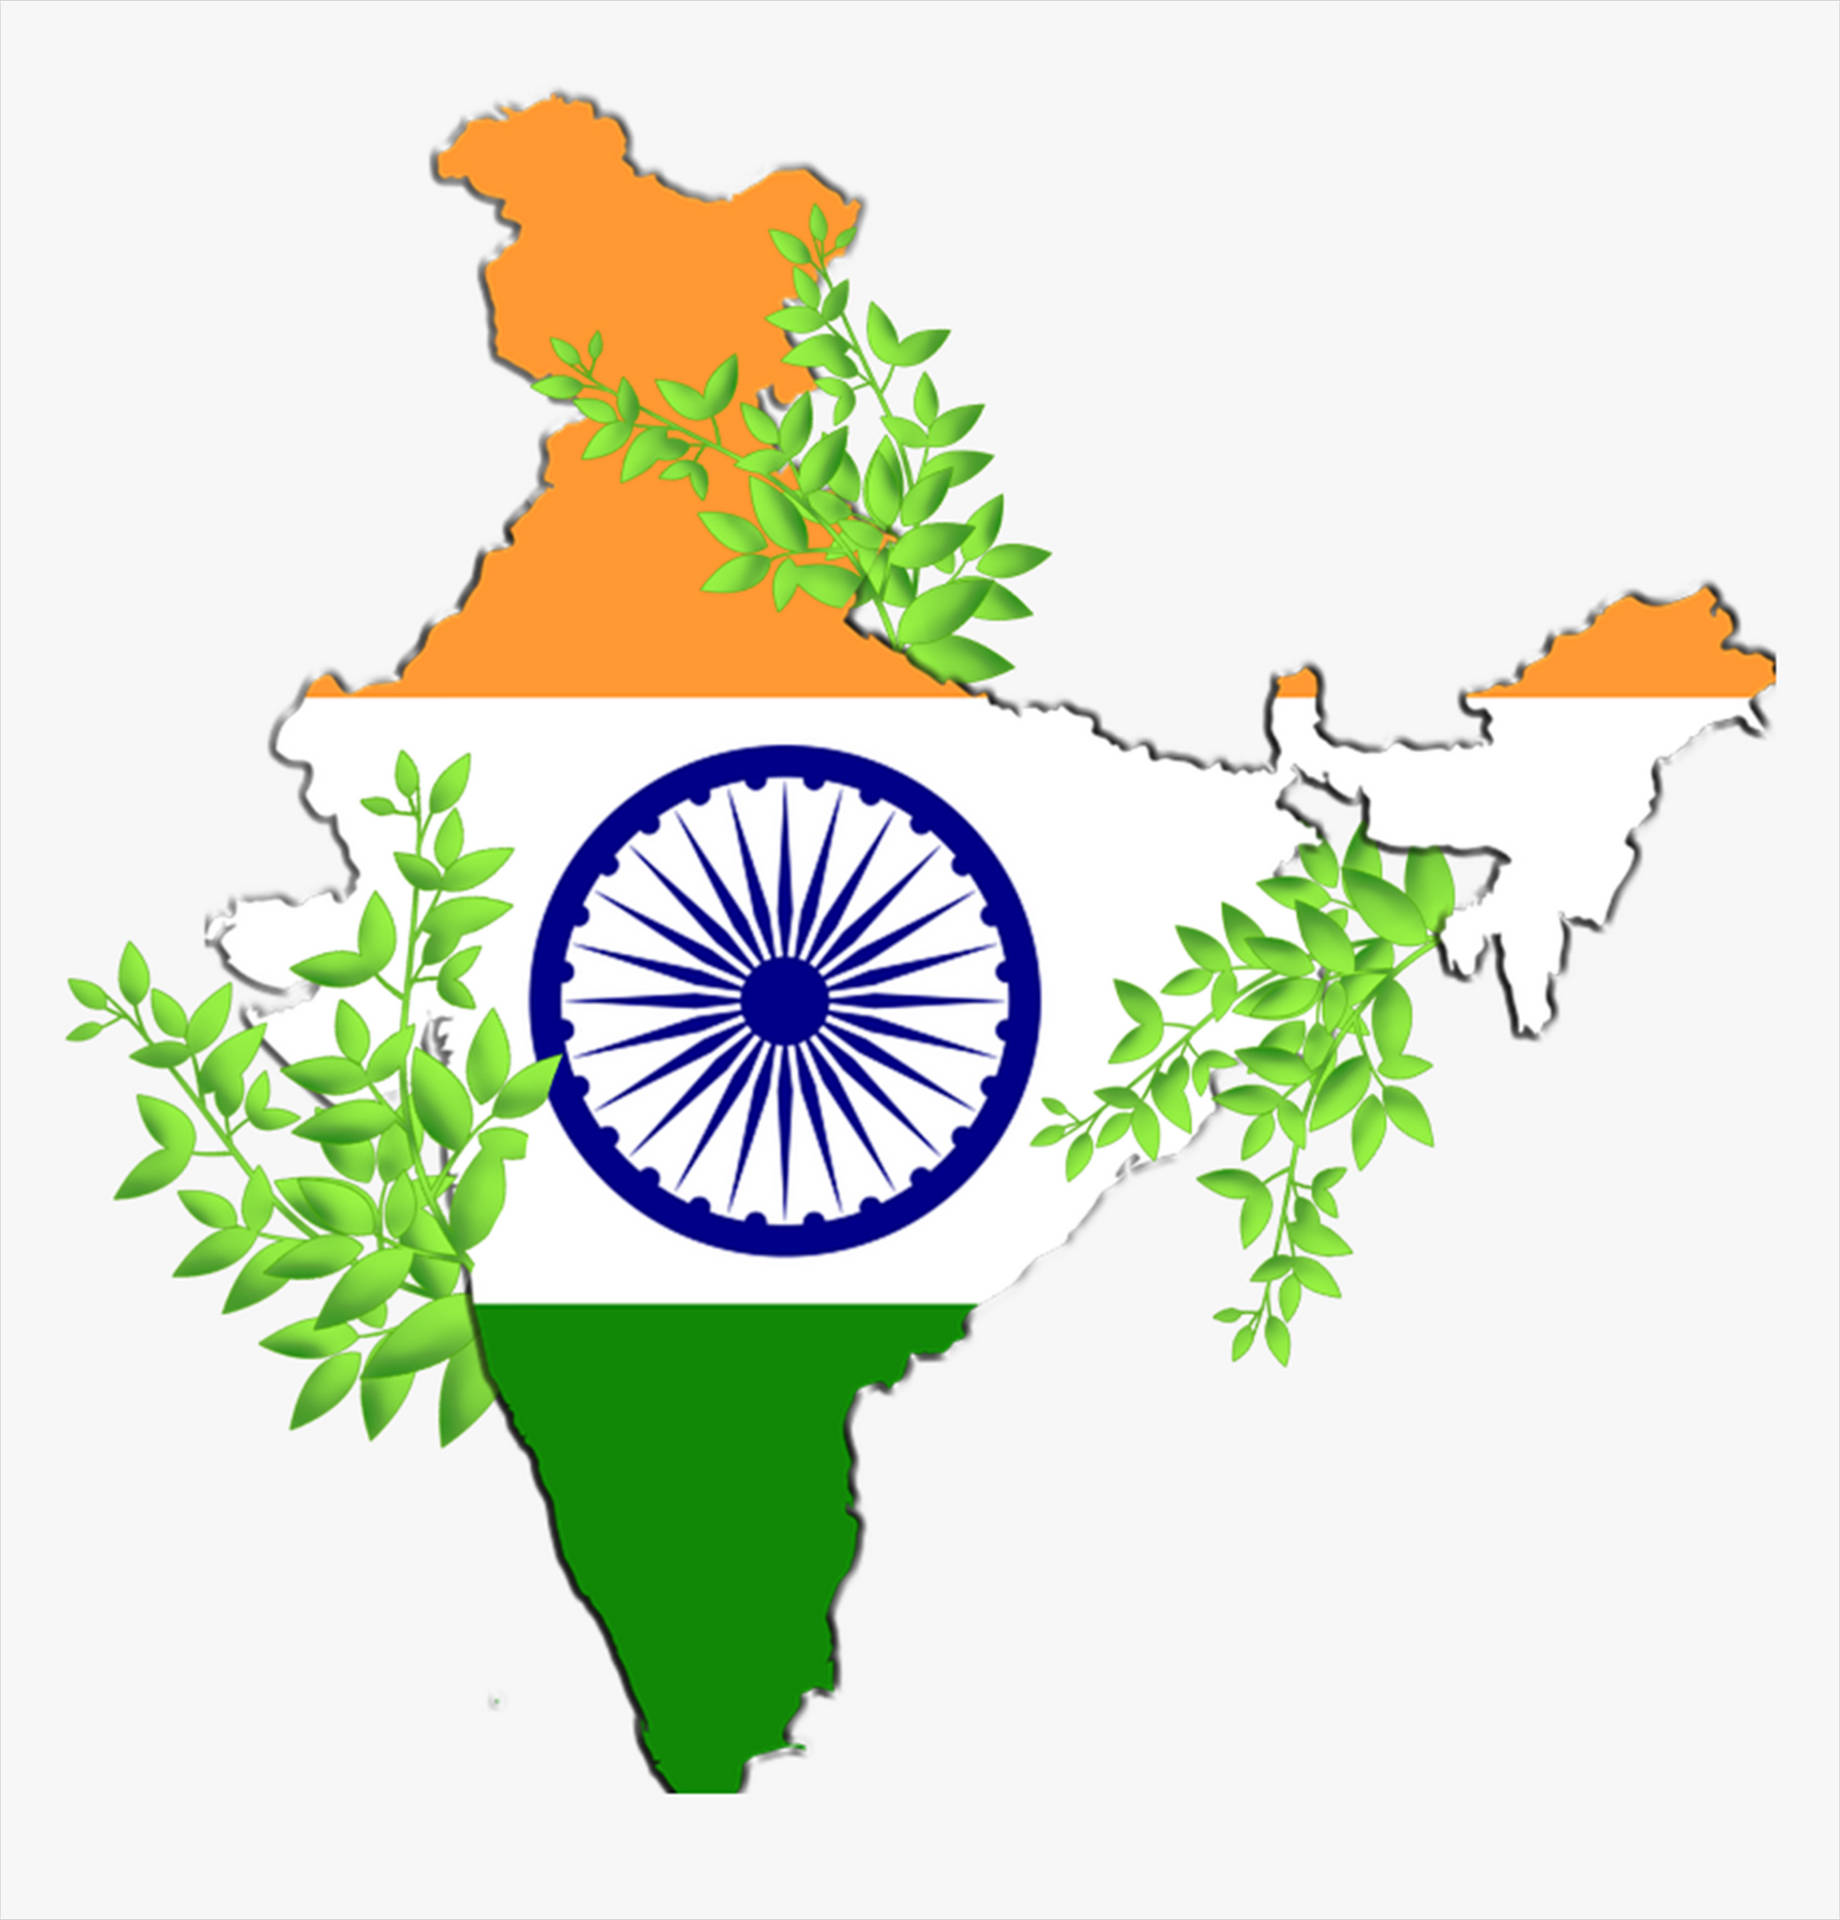 India Map | Free Map of India With States, UTs and Capital Cities to  Download